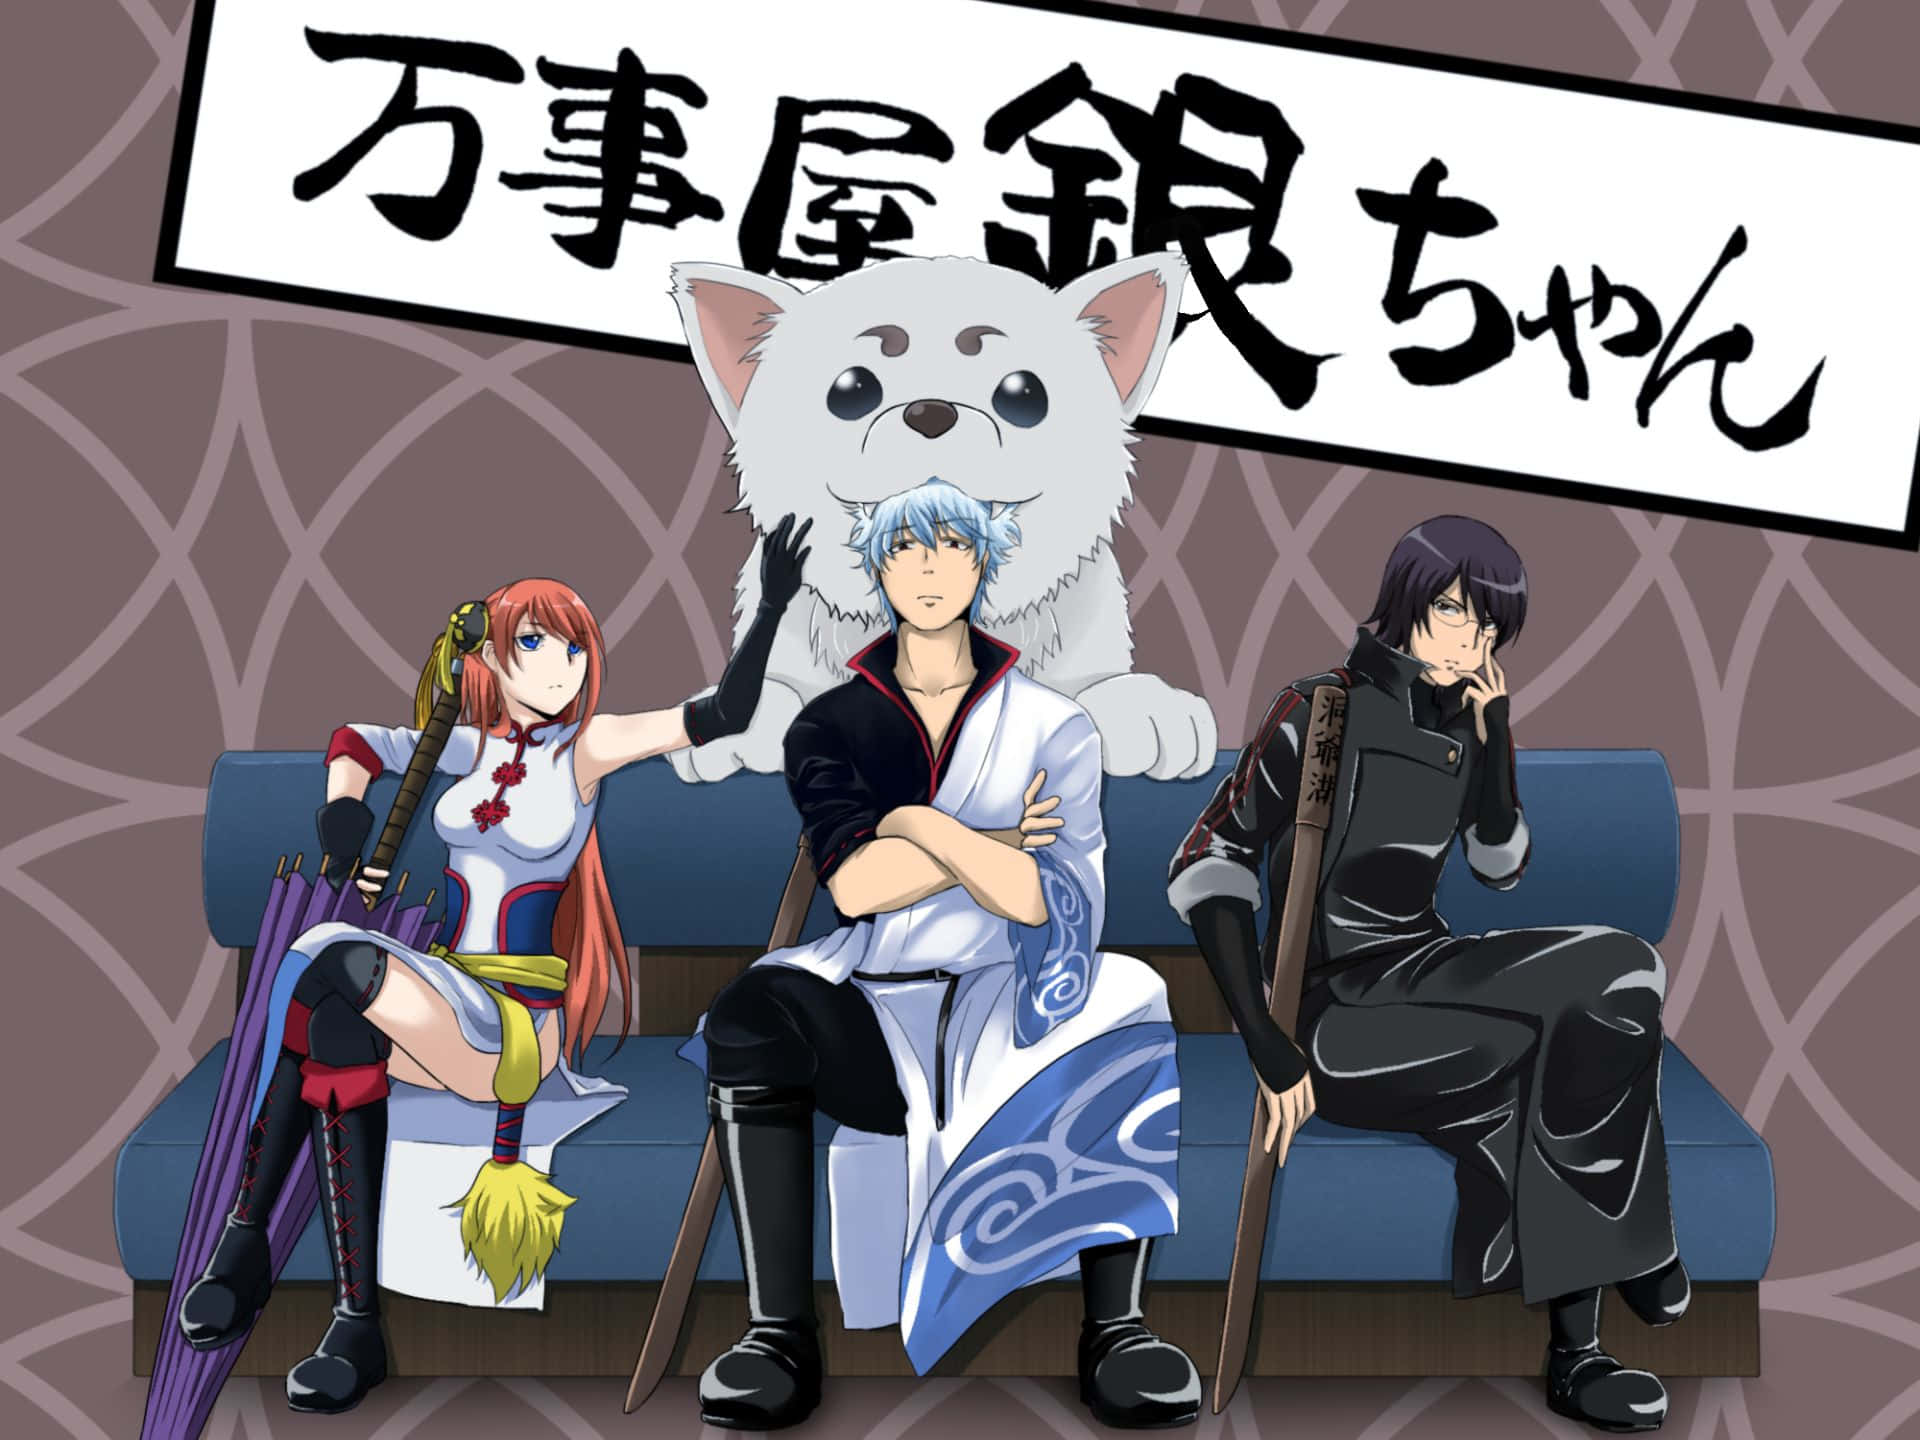 Watch Gintama, the Hilarious Anime About A Samurai And His Crazy MC Friends